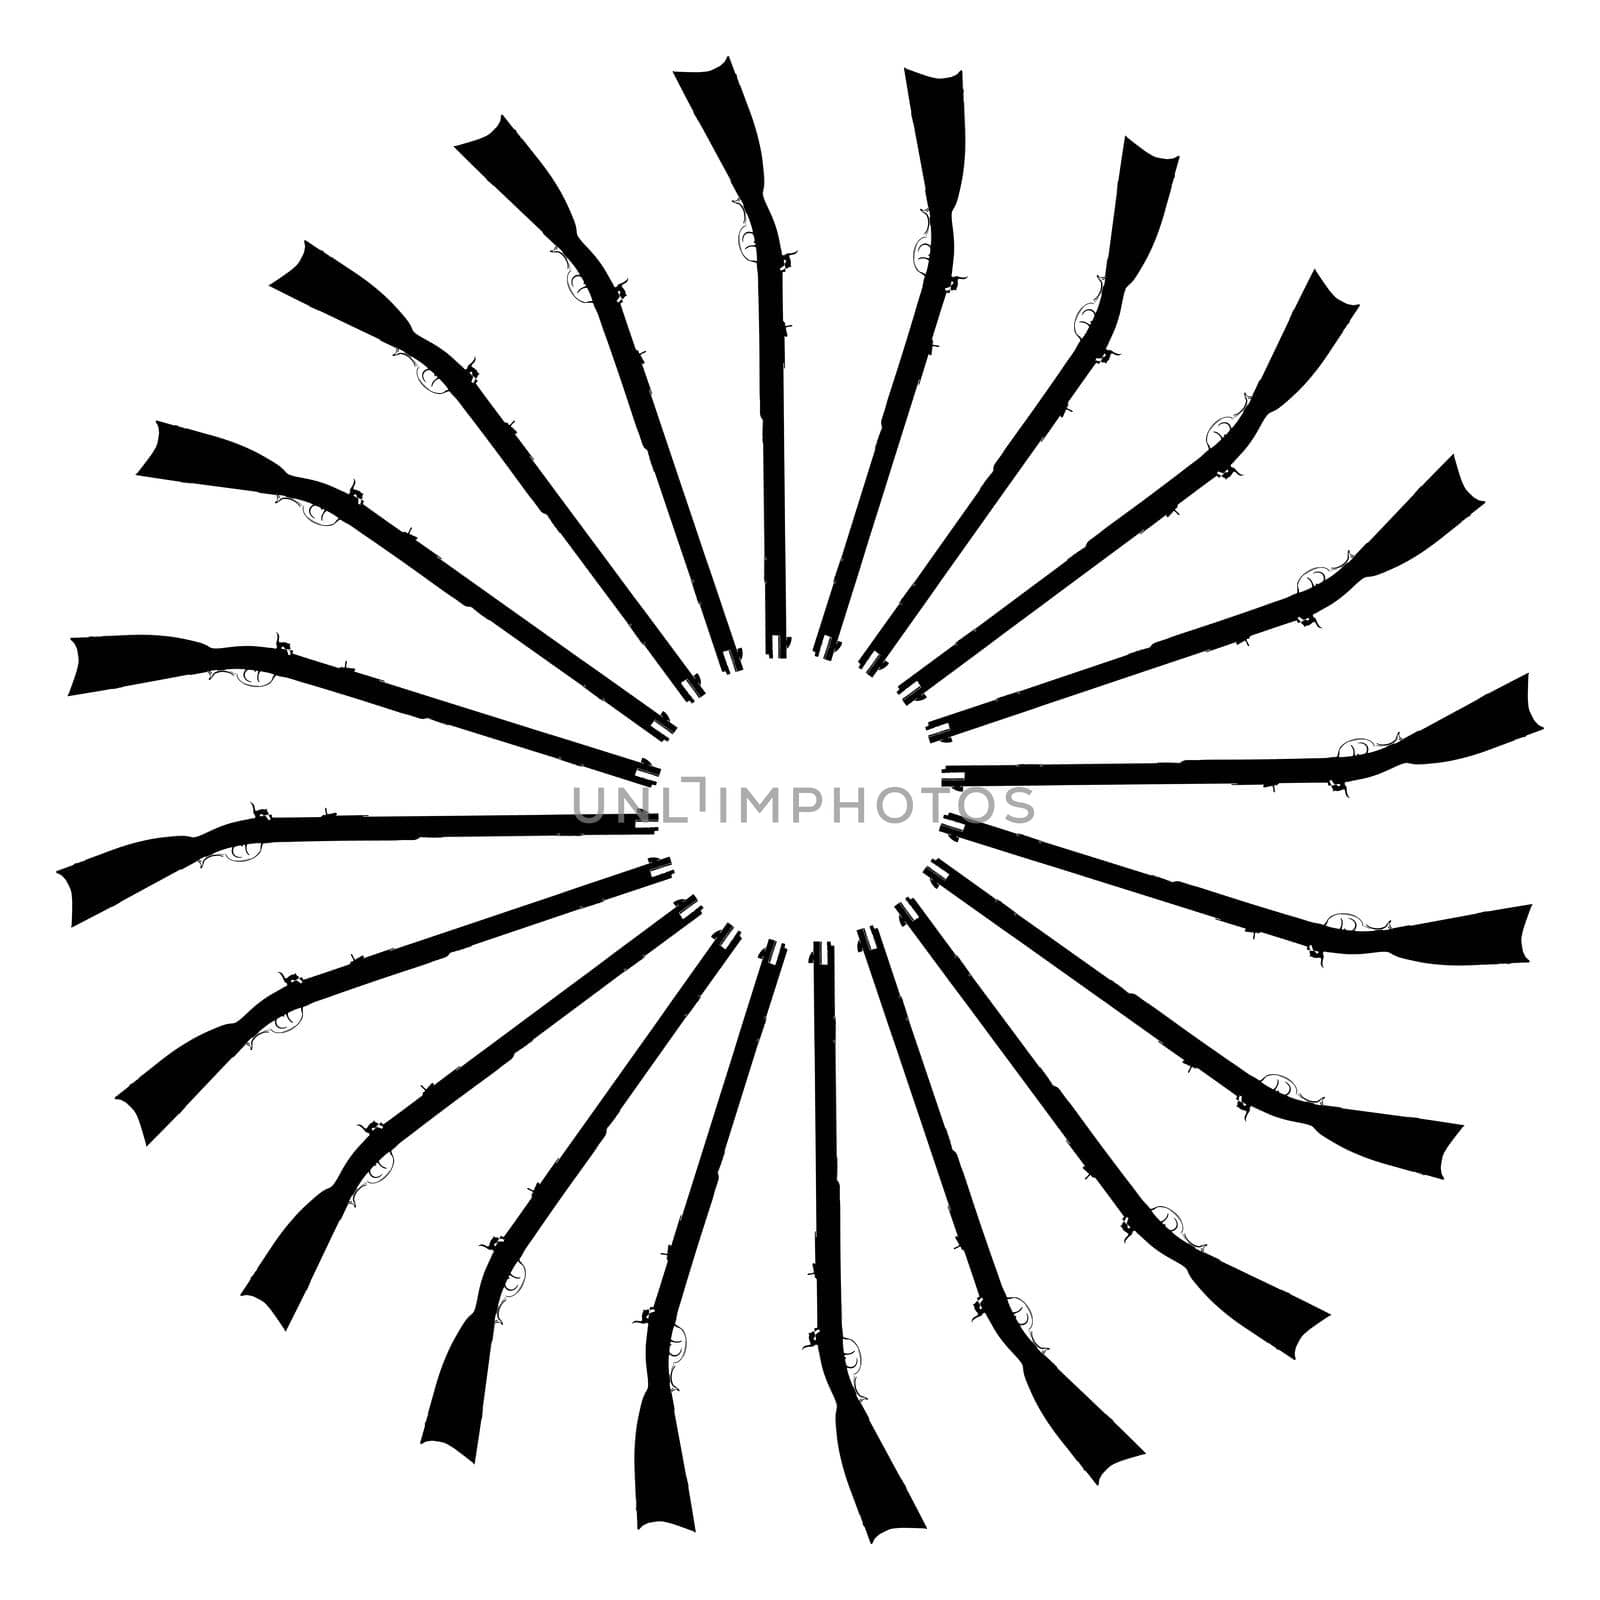 A mandale of old musket rifles in a black and white circle